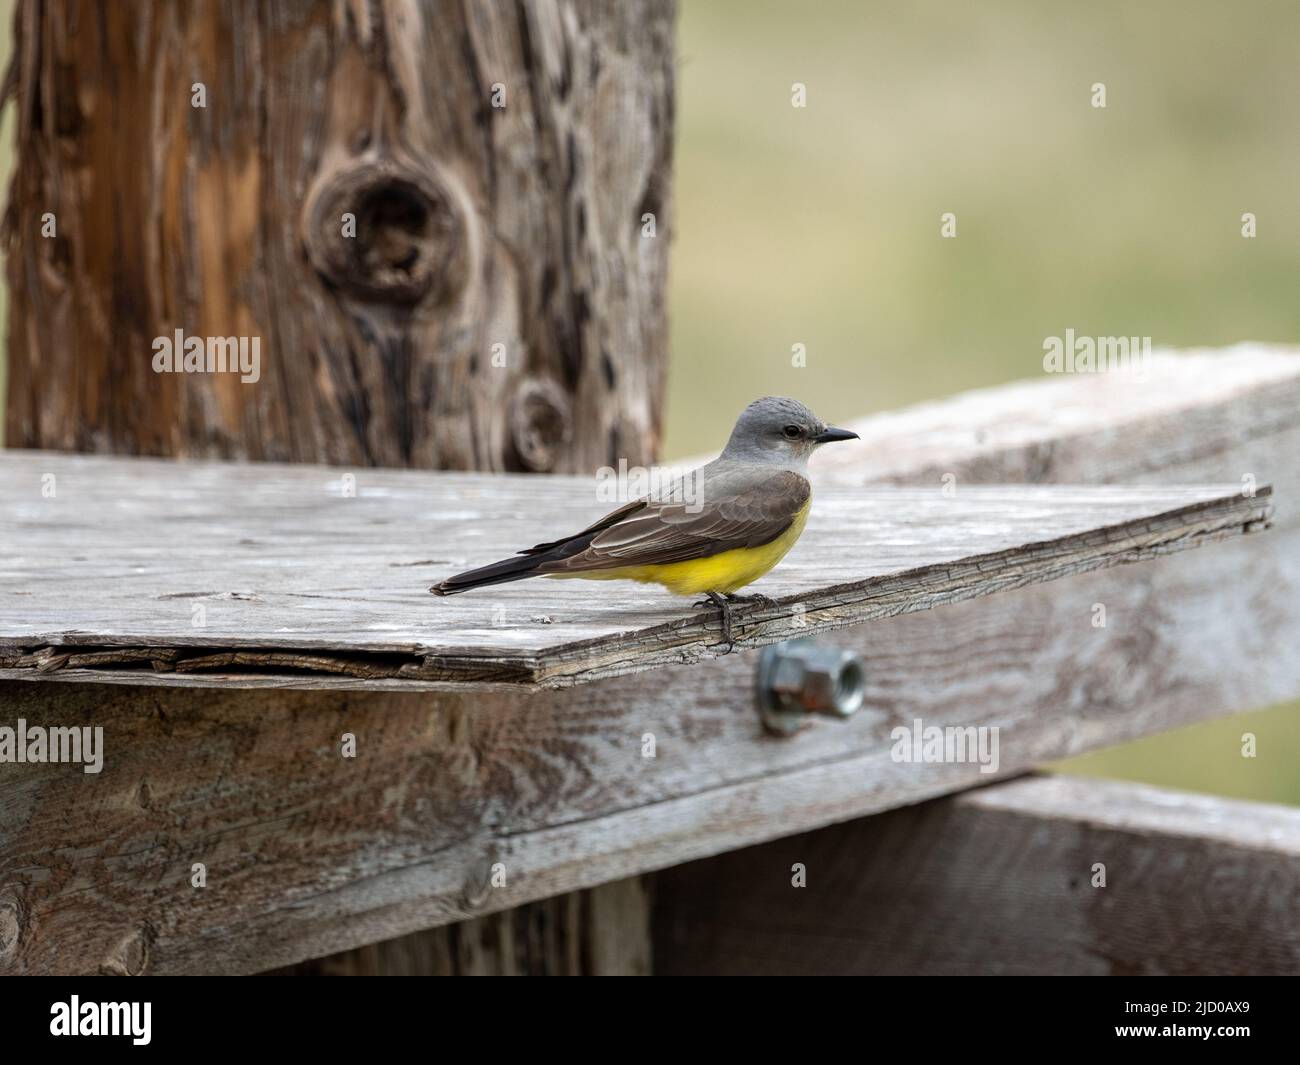 A Western Kingbird perches on a warm summer afternoon Stock Photo